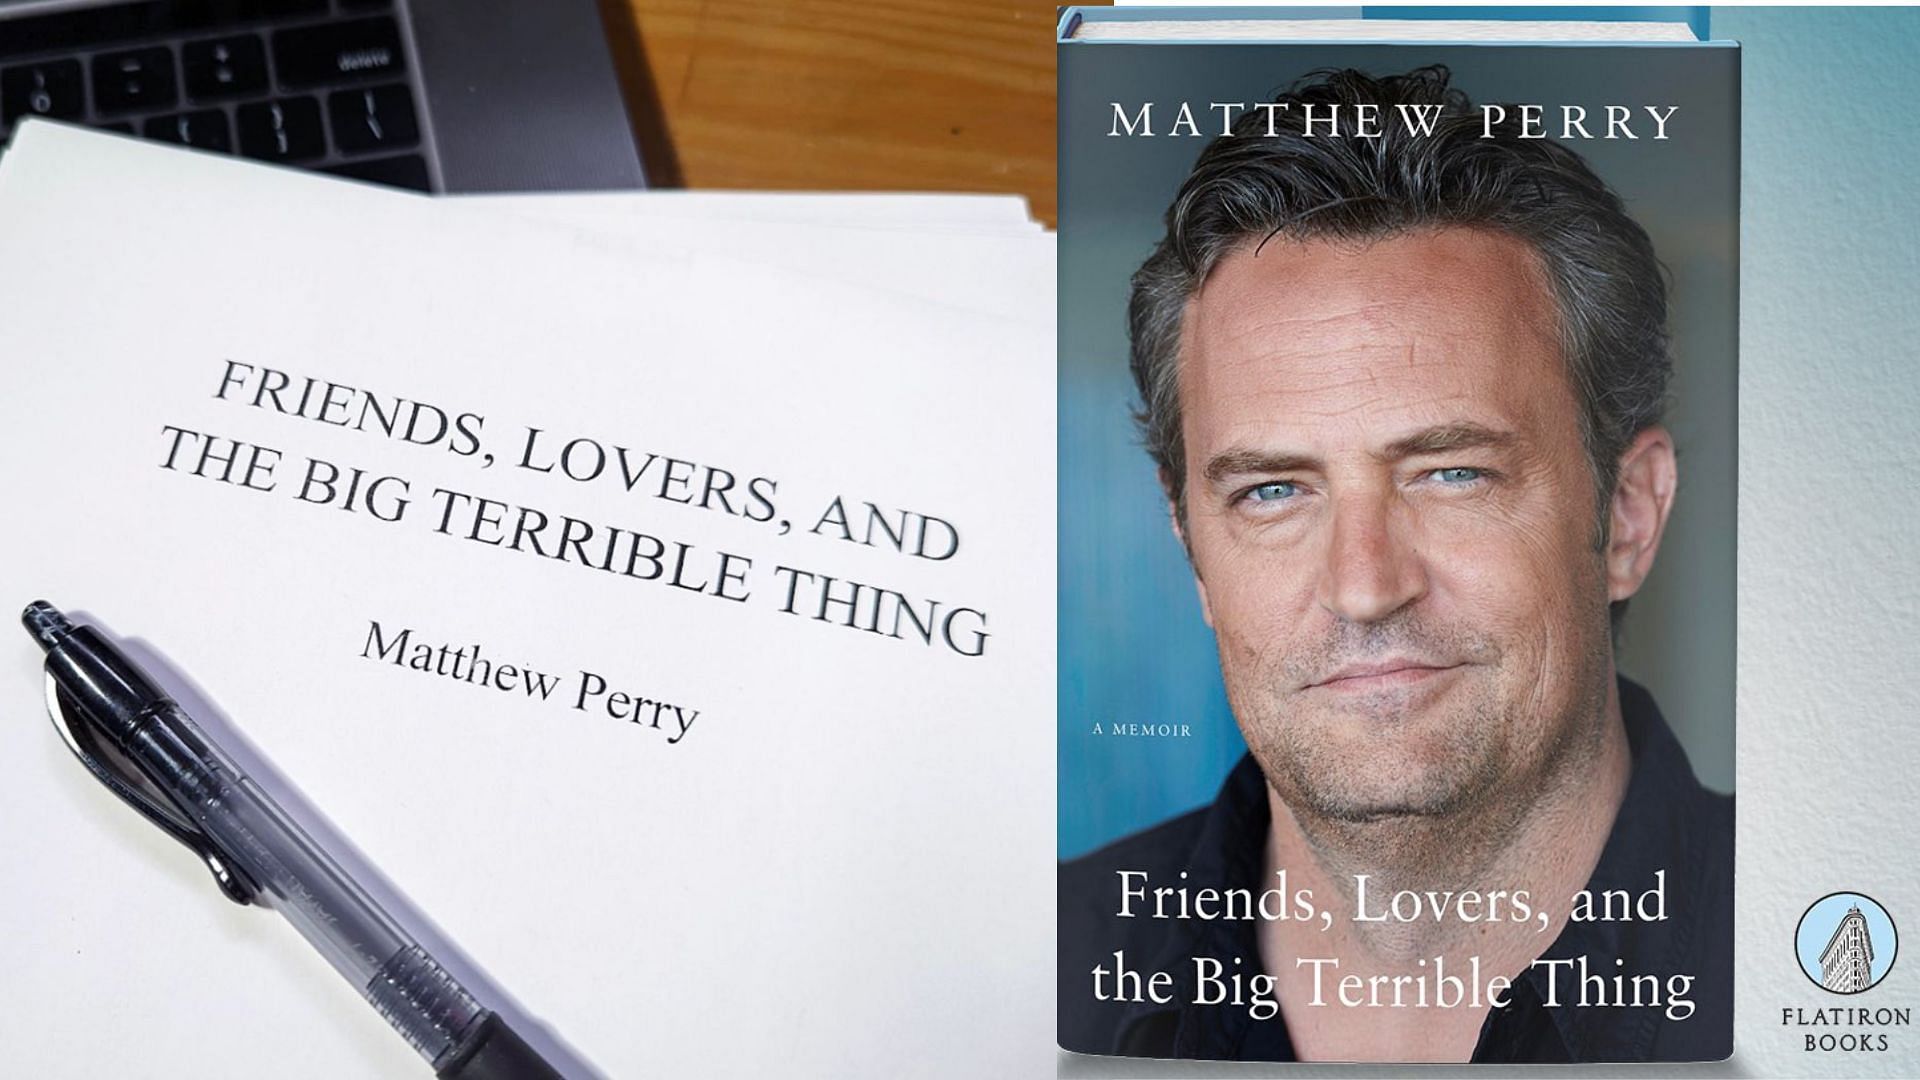 Friends, Lovers, and the Big Terrible Thing: A Memoir by Matthew